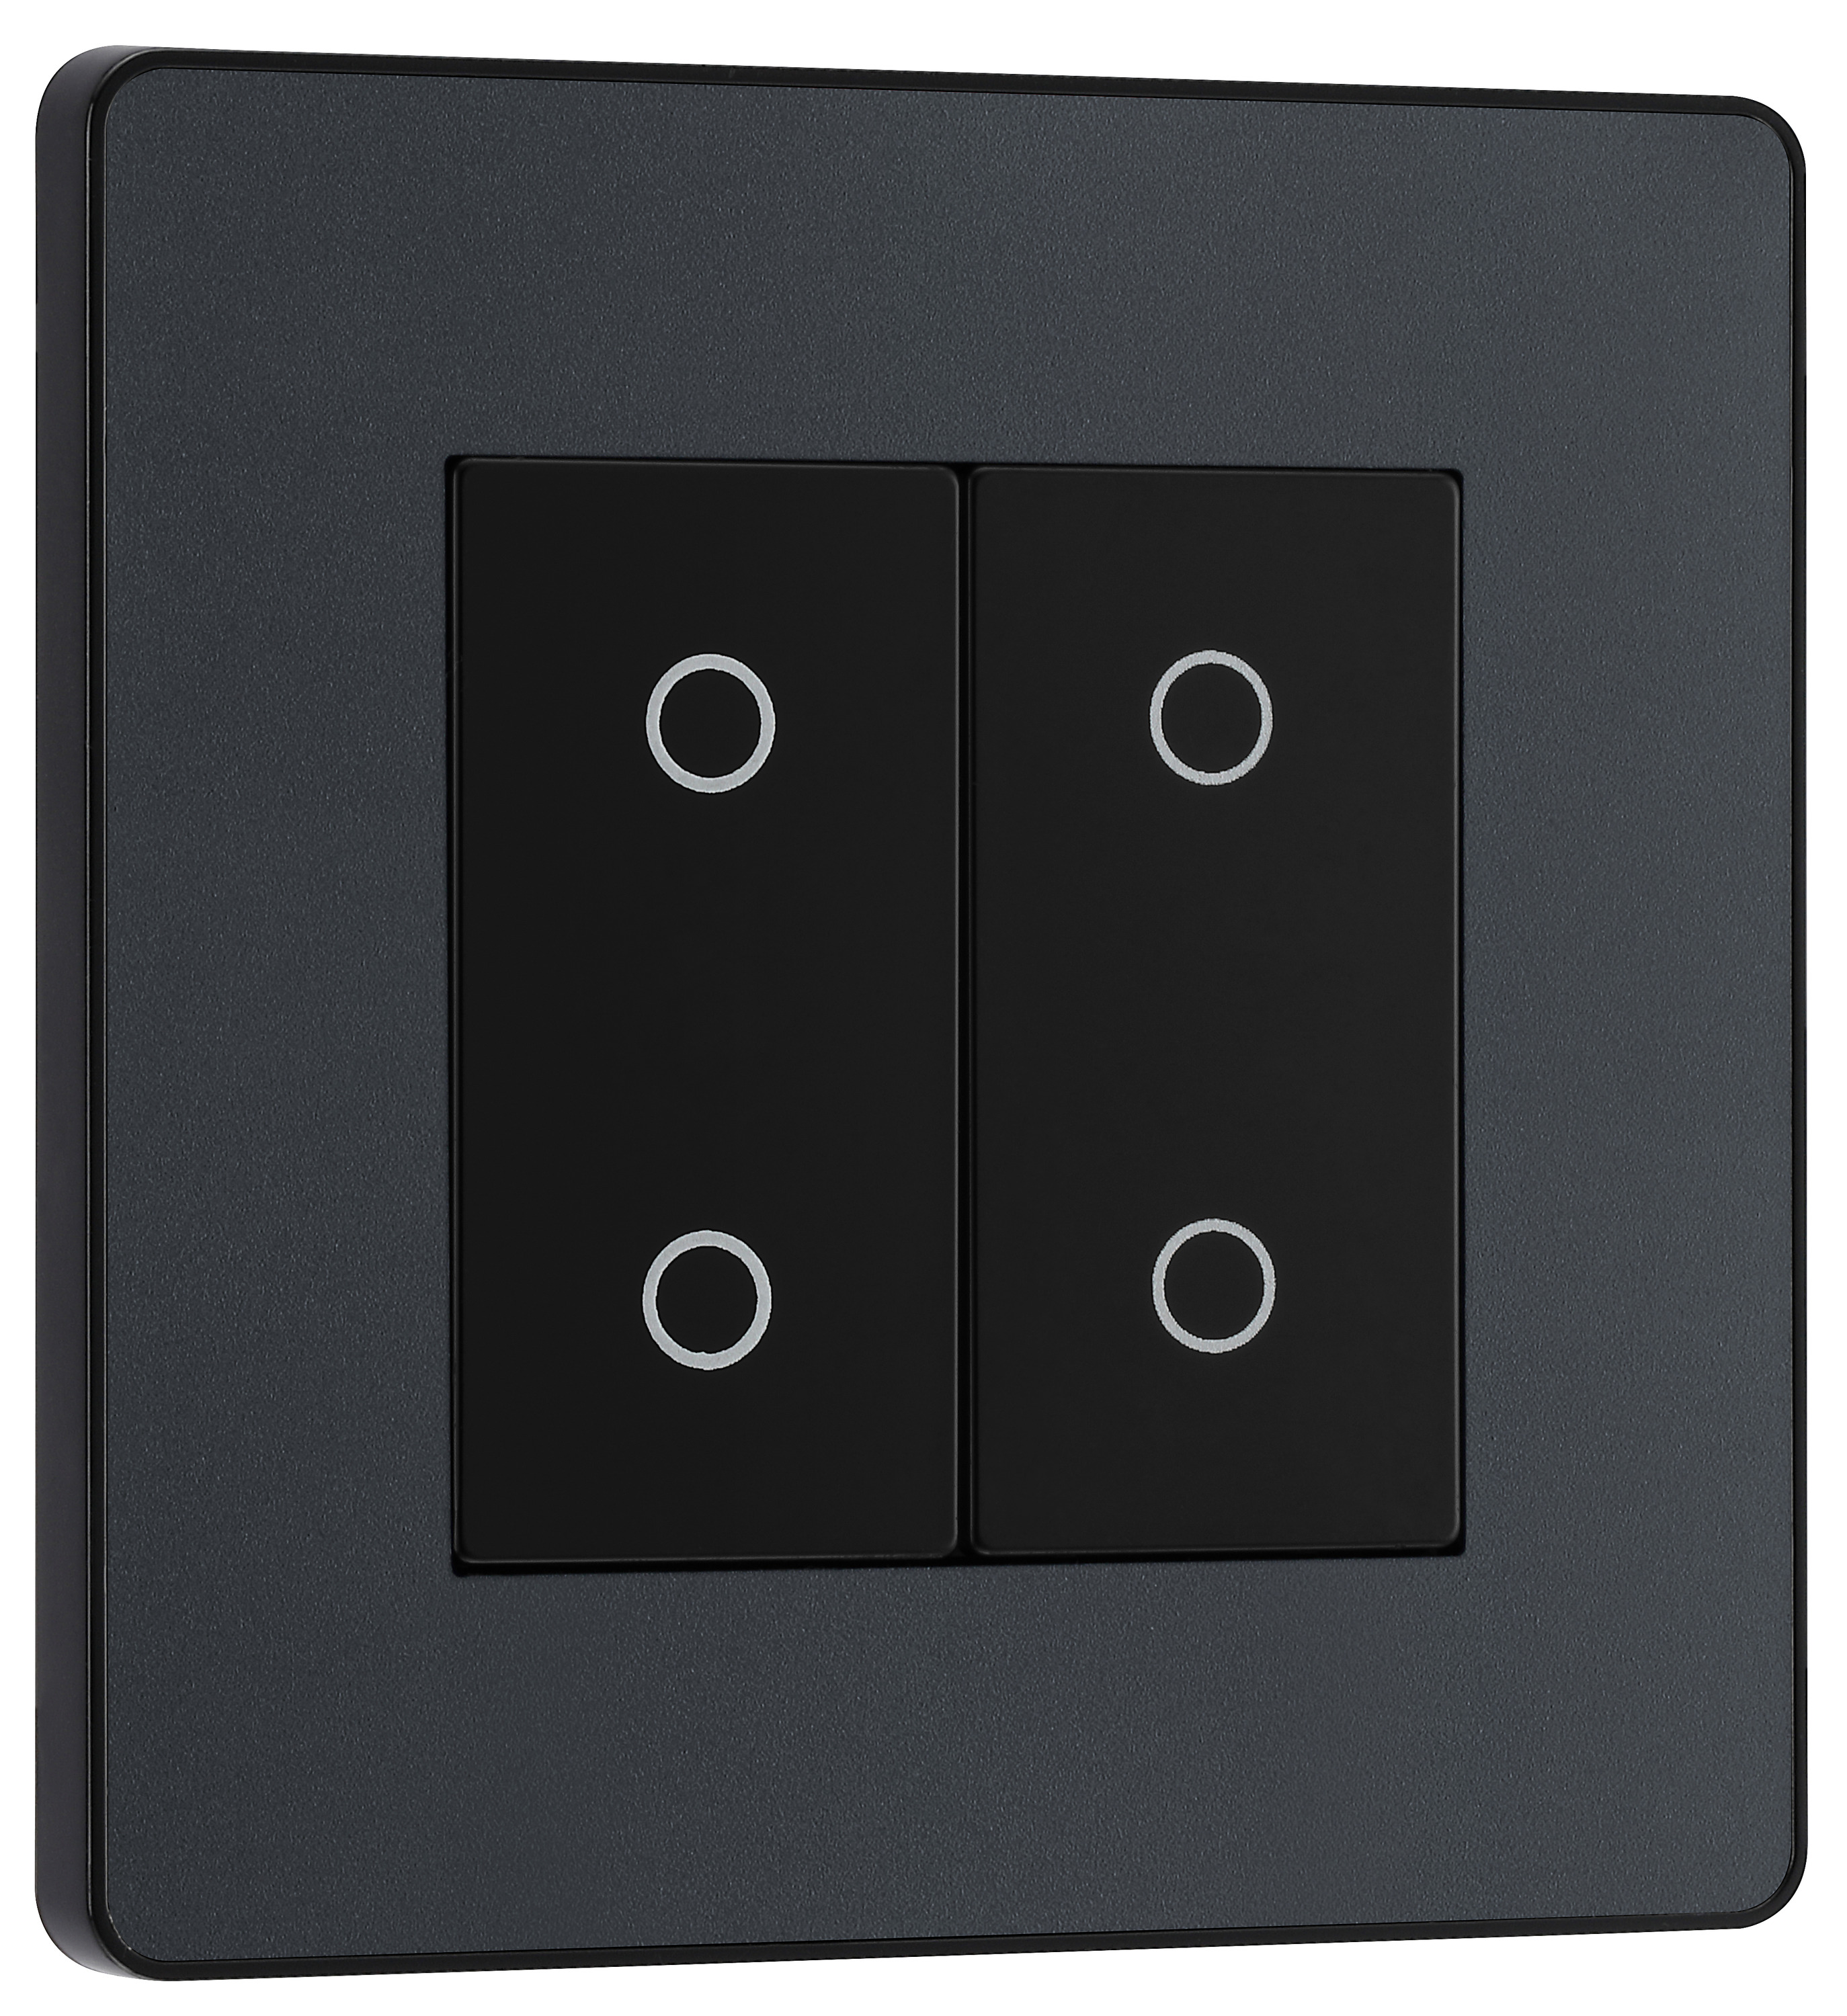 Image of BG Evolve Master Matt Grey 2 Way Double Touch Dimmer Switch - 200W